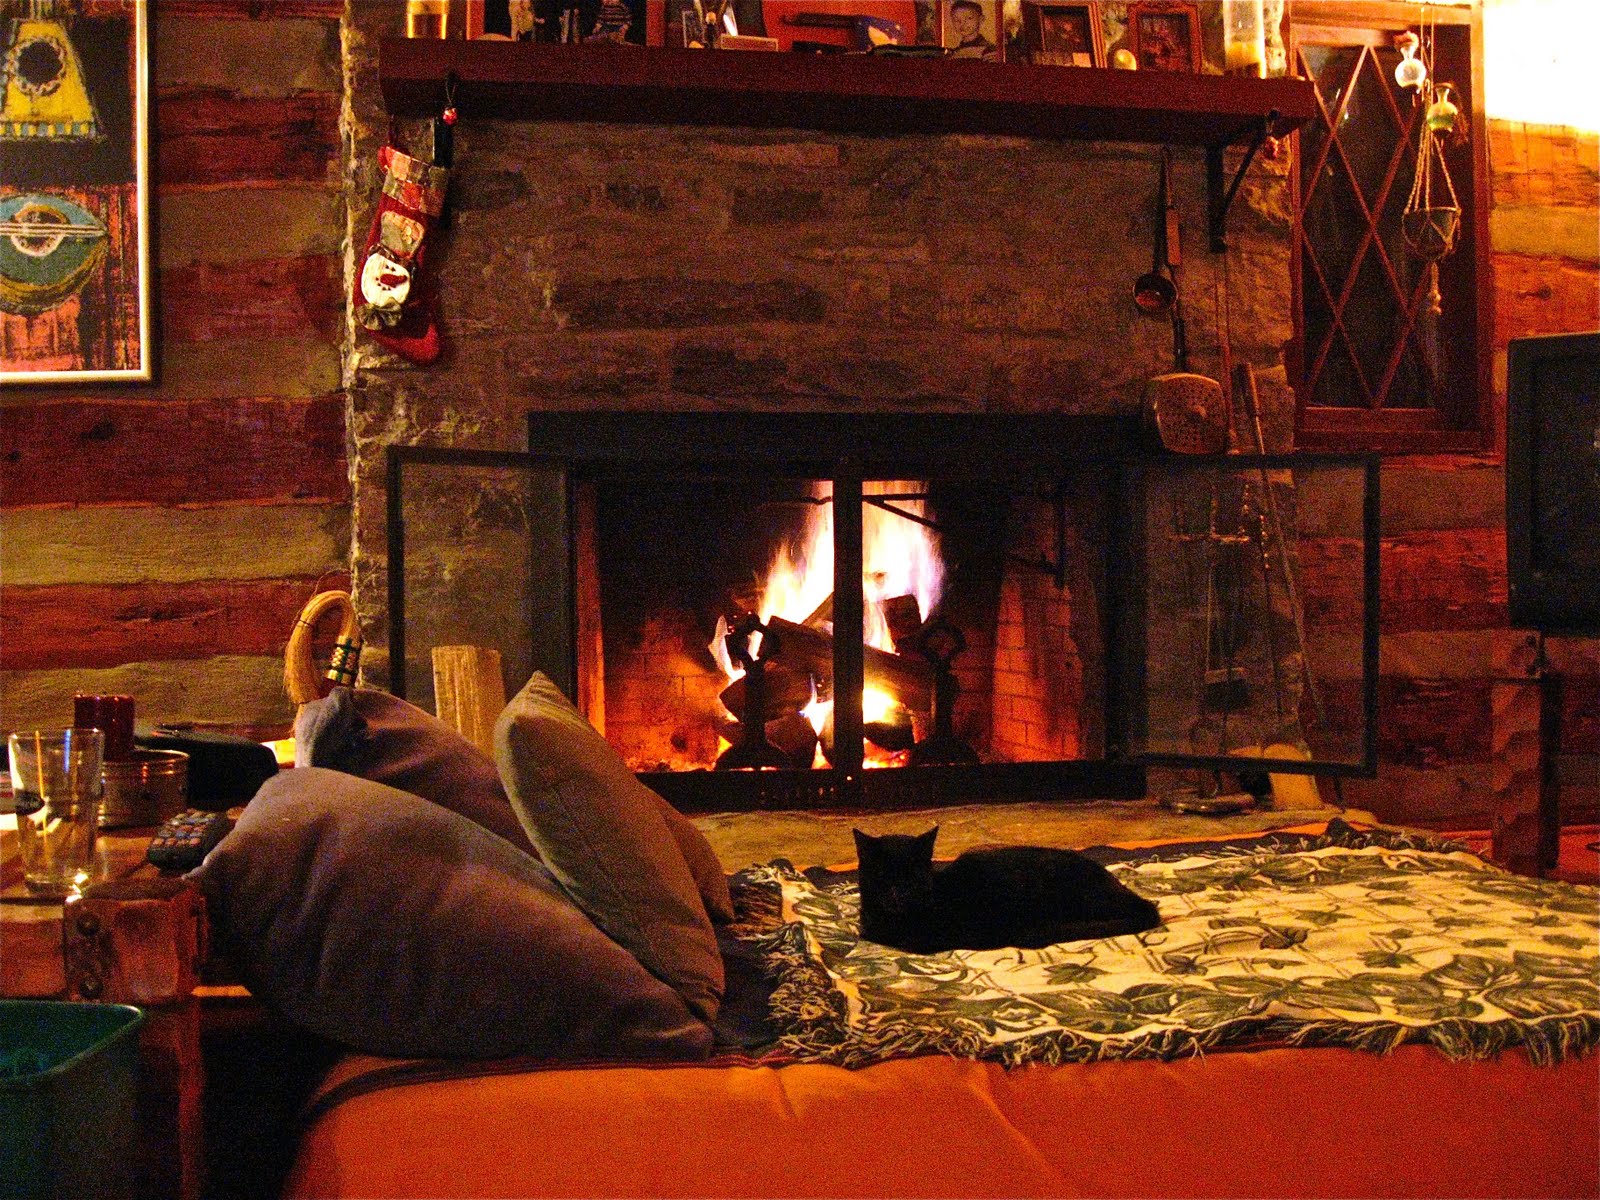 scenes from winter one warm and cozy one bitter cold from my tennessee 1600x1200